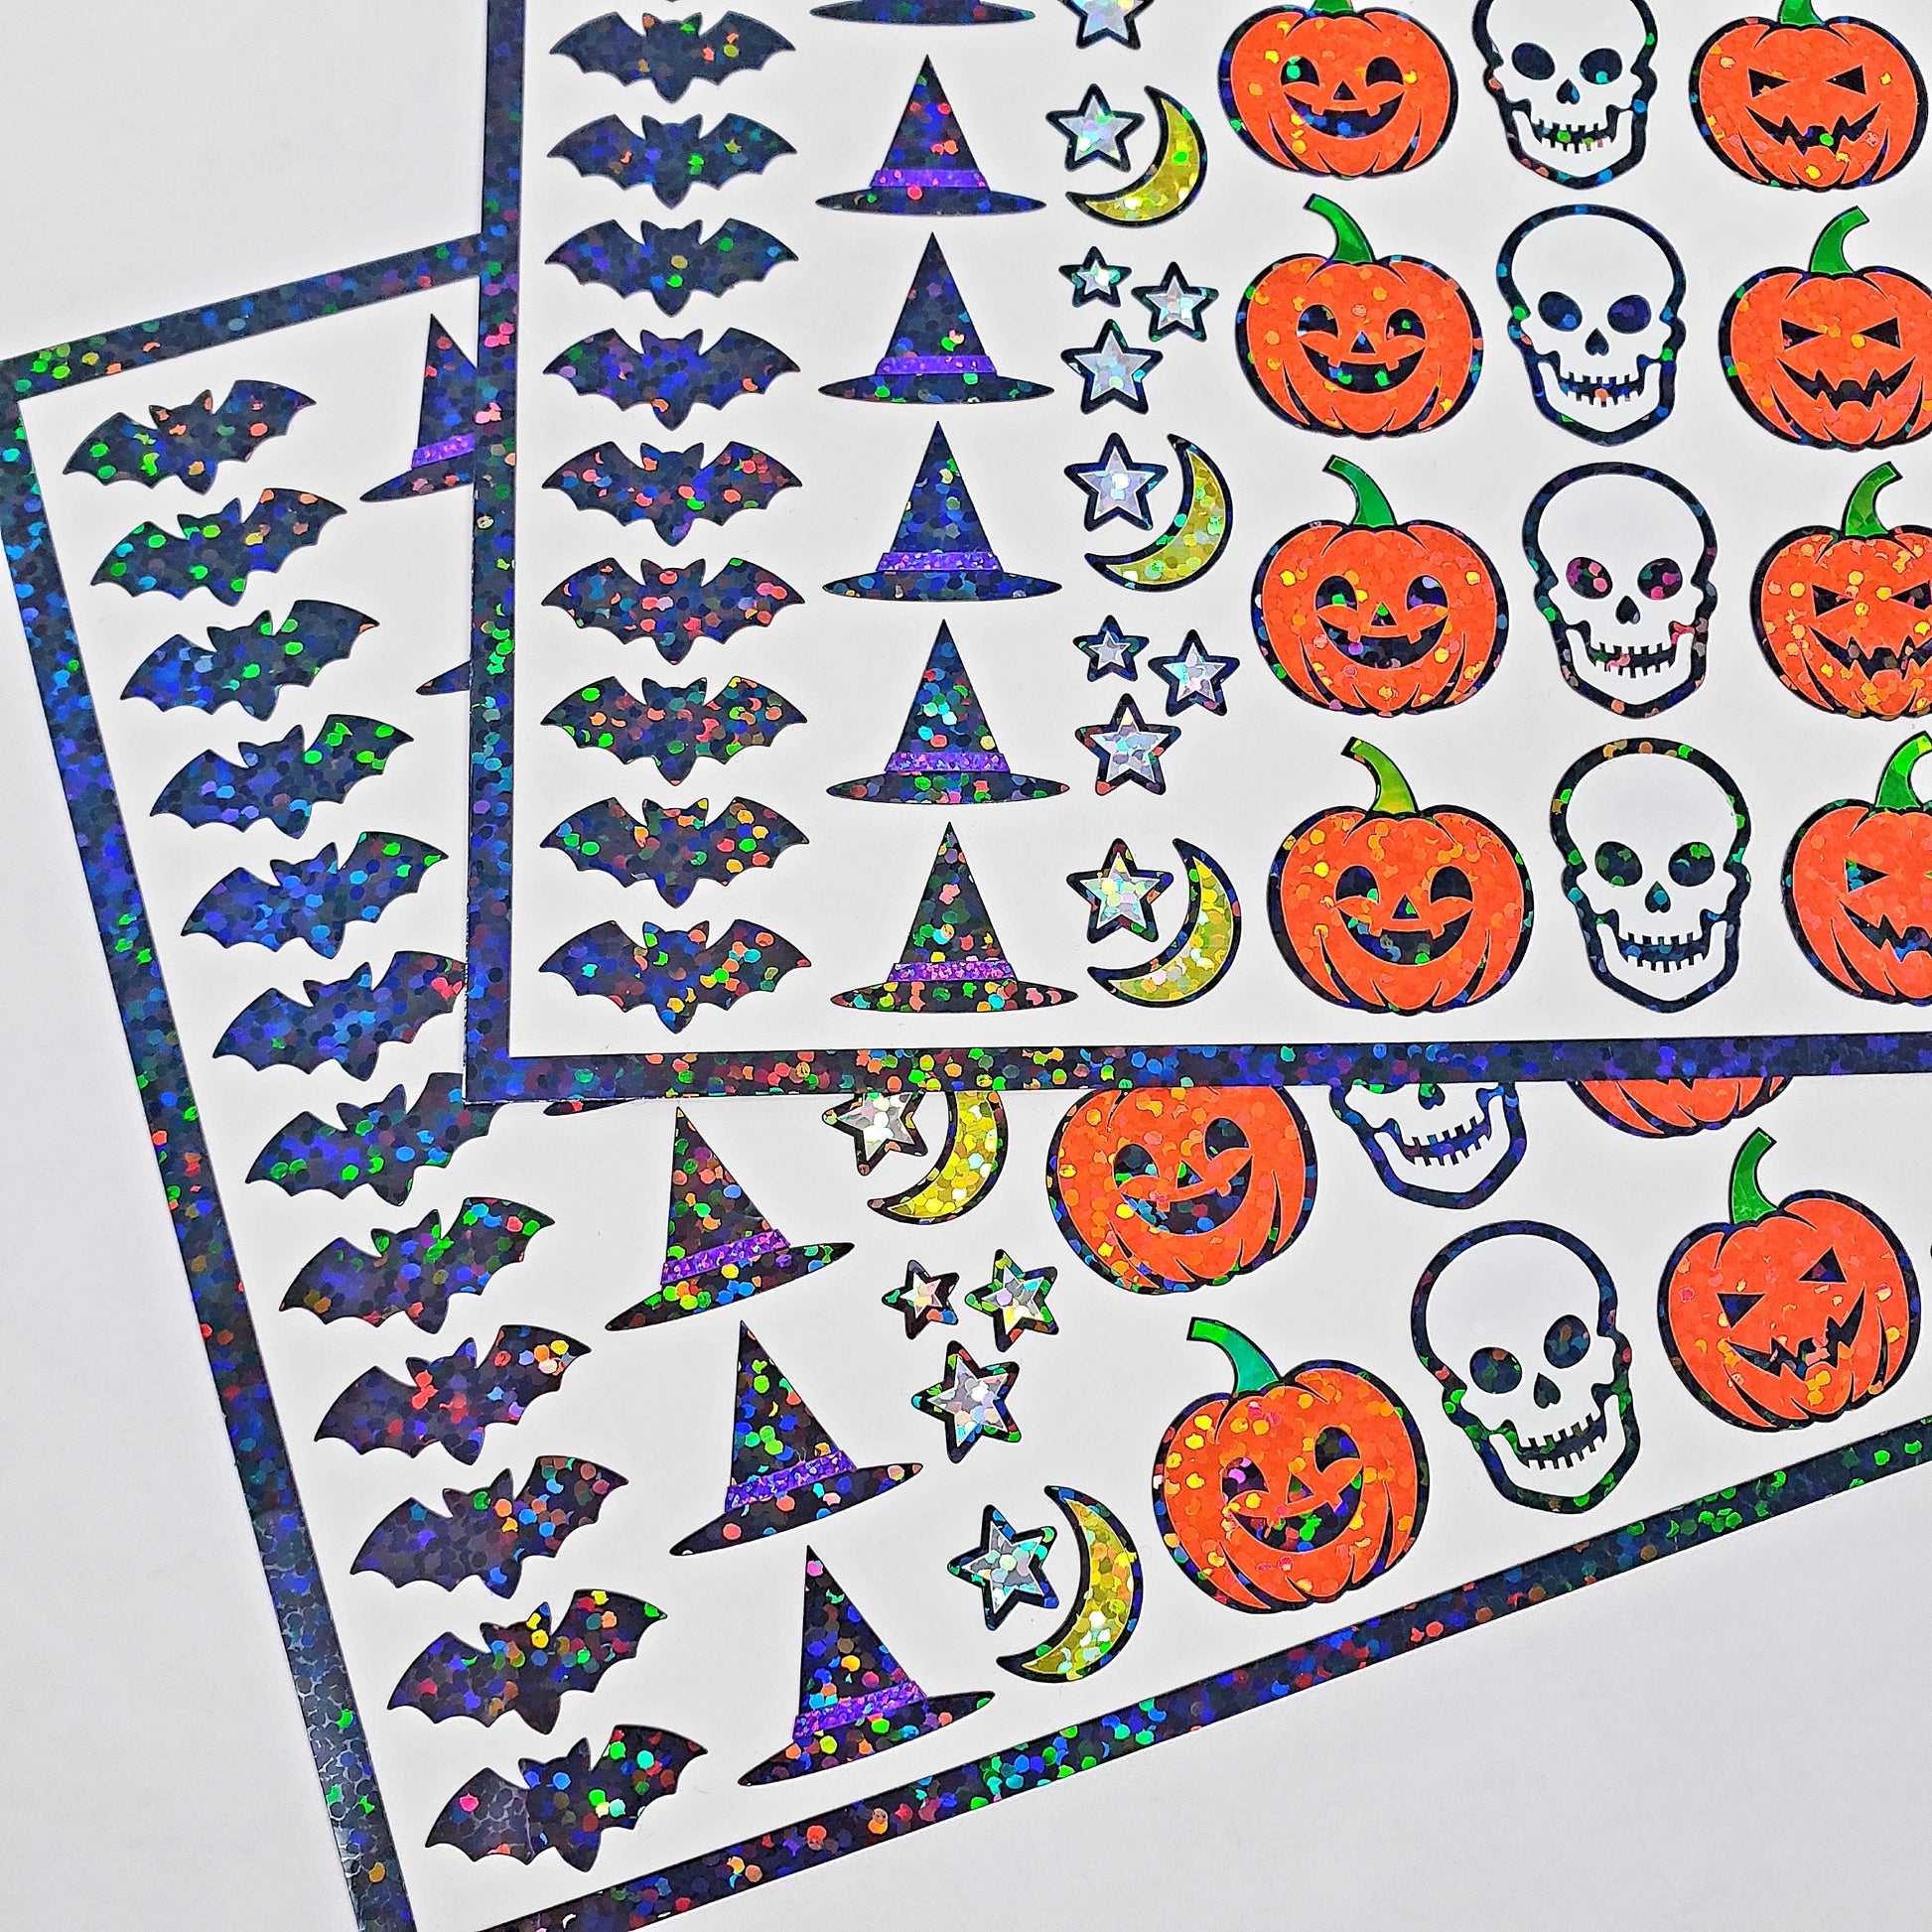 Halloween Stickers, set of 68 spooky sparkly glitter stickers of ghosts, bats, witch hats, pumpkins and skulls for fall and October 31.